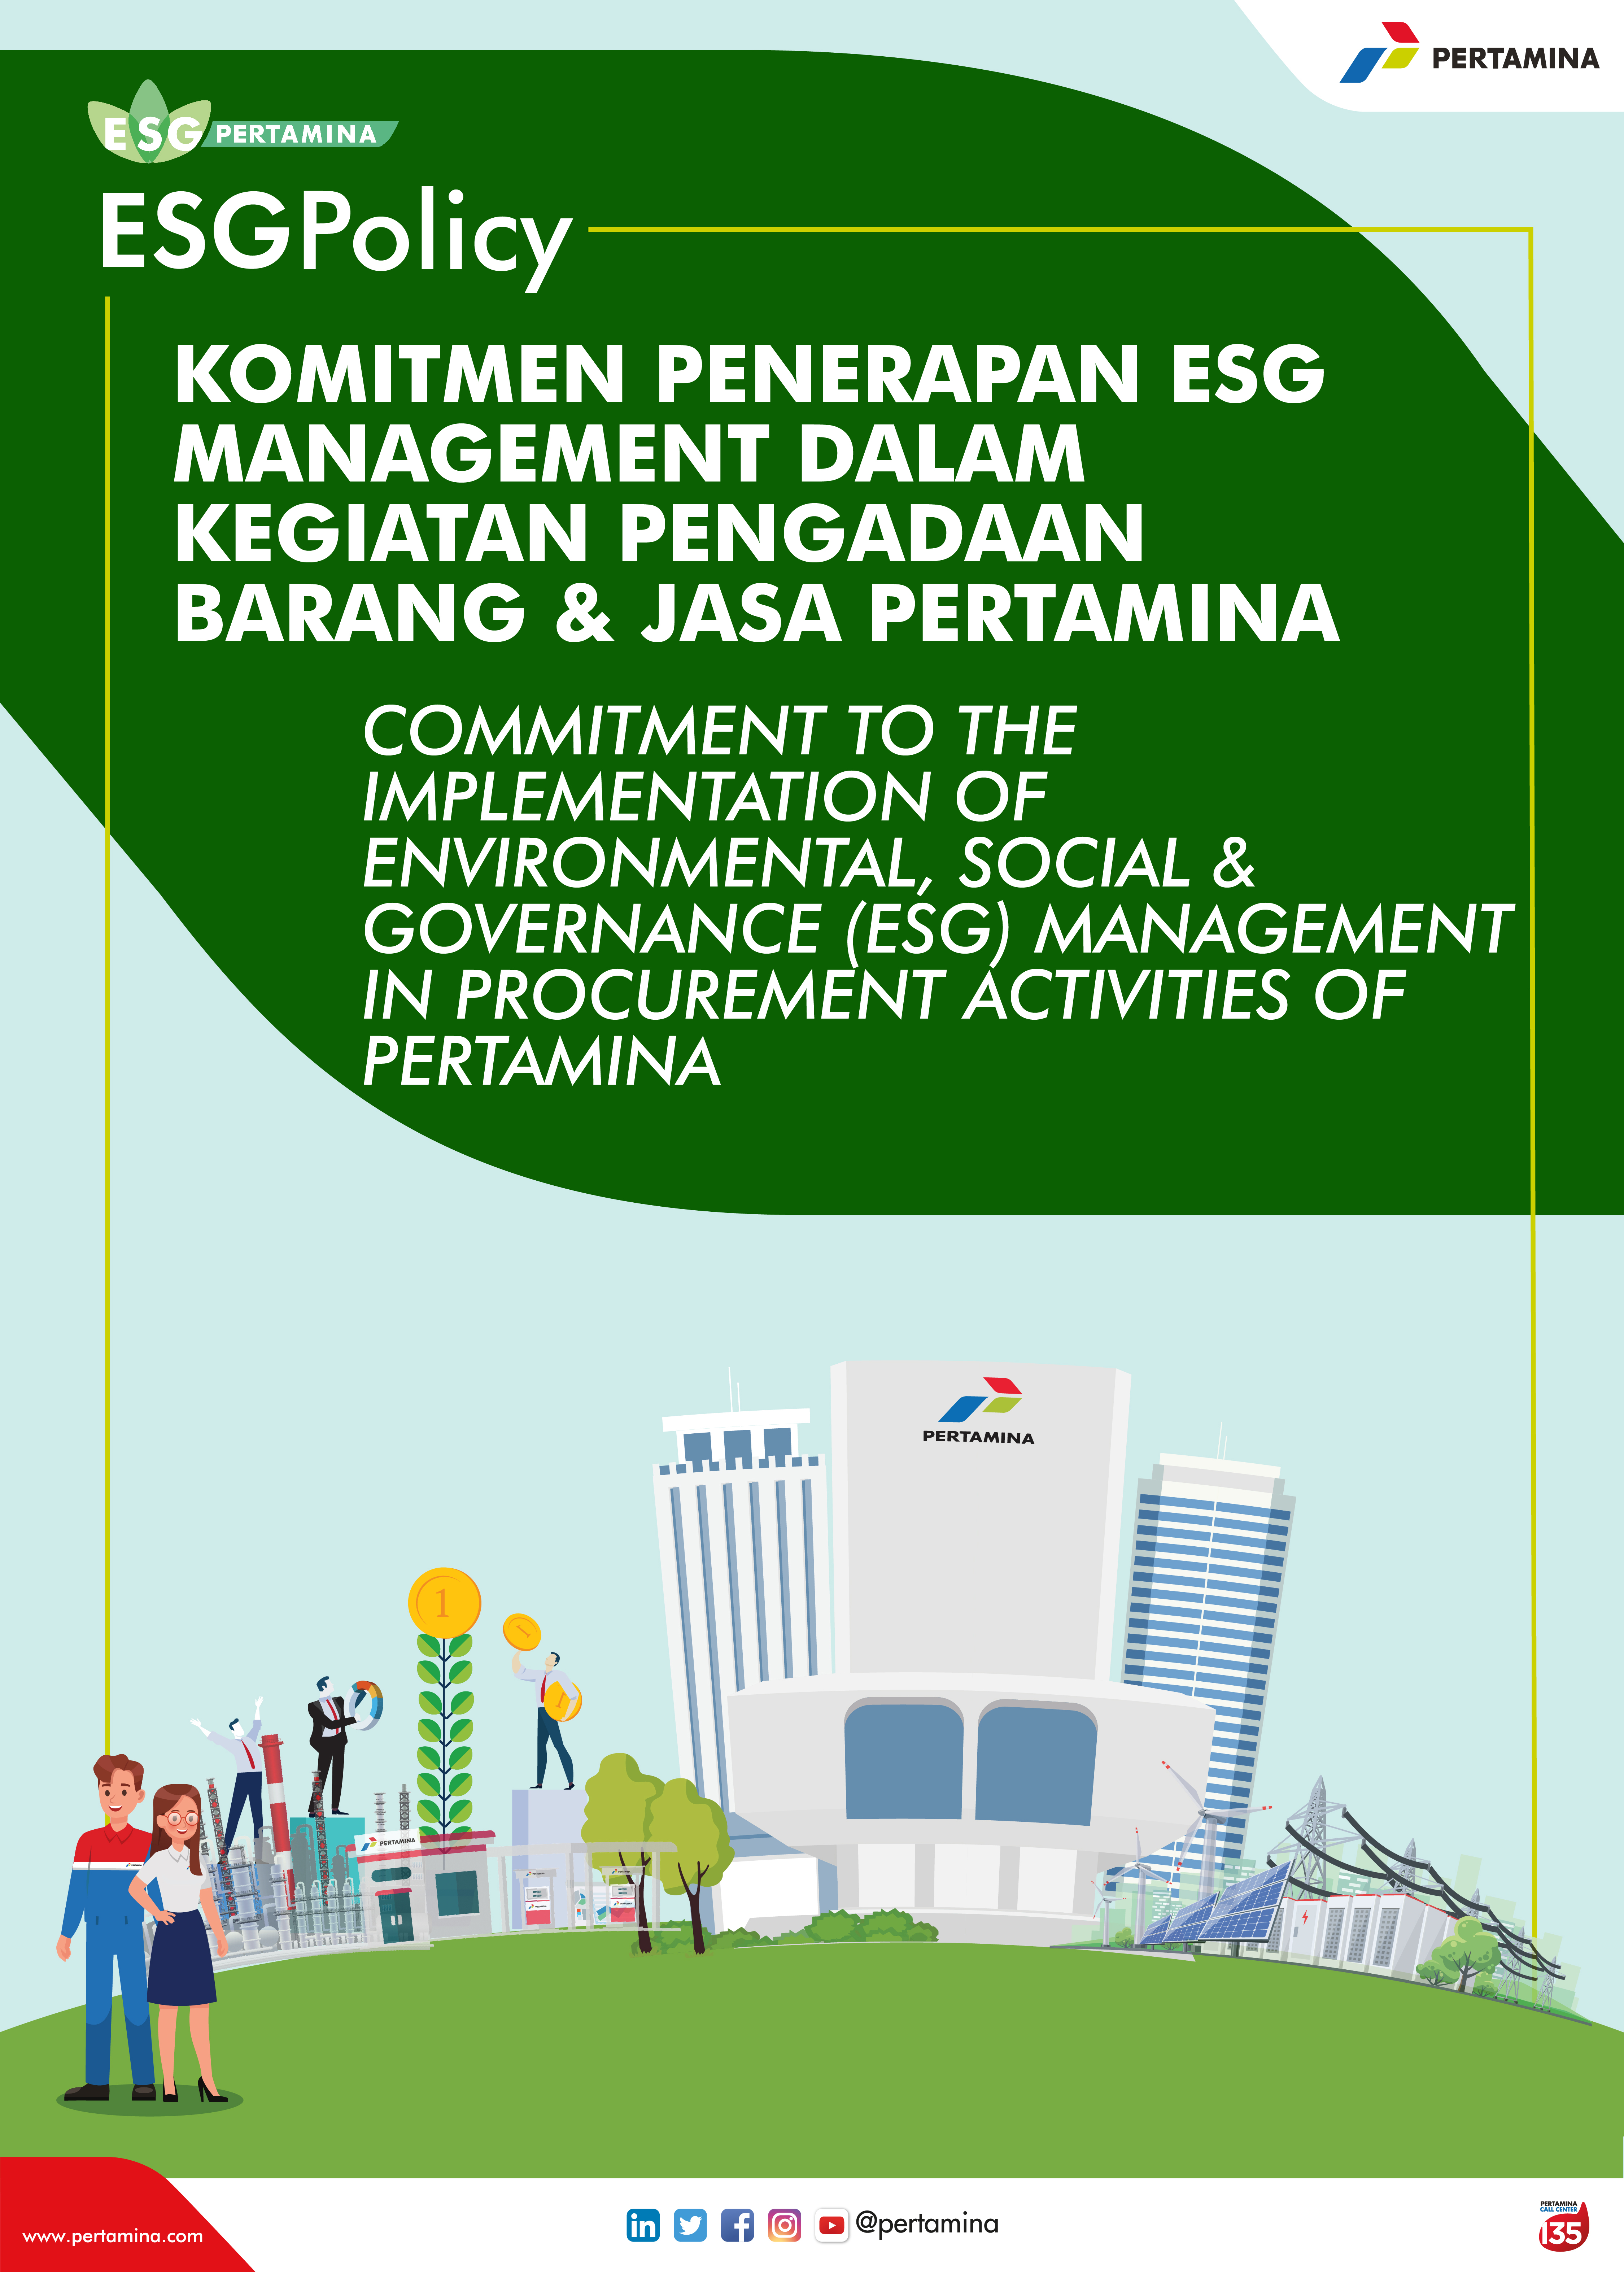 COMMITMENT TO THE IMPLEMENTATION OF ENVIROMENTAL, SOCIAL AND GOVERNANCE MANAGEMENT IN PROCUREMENT ACTIVITIES OF PERTAMINA